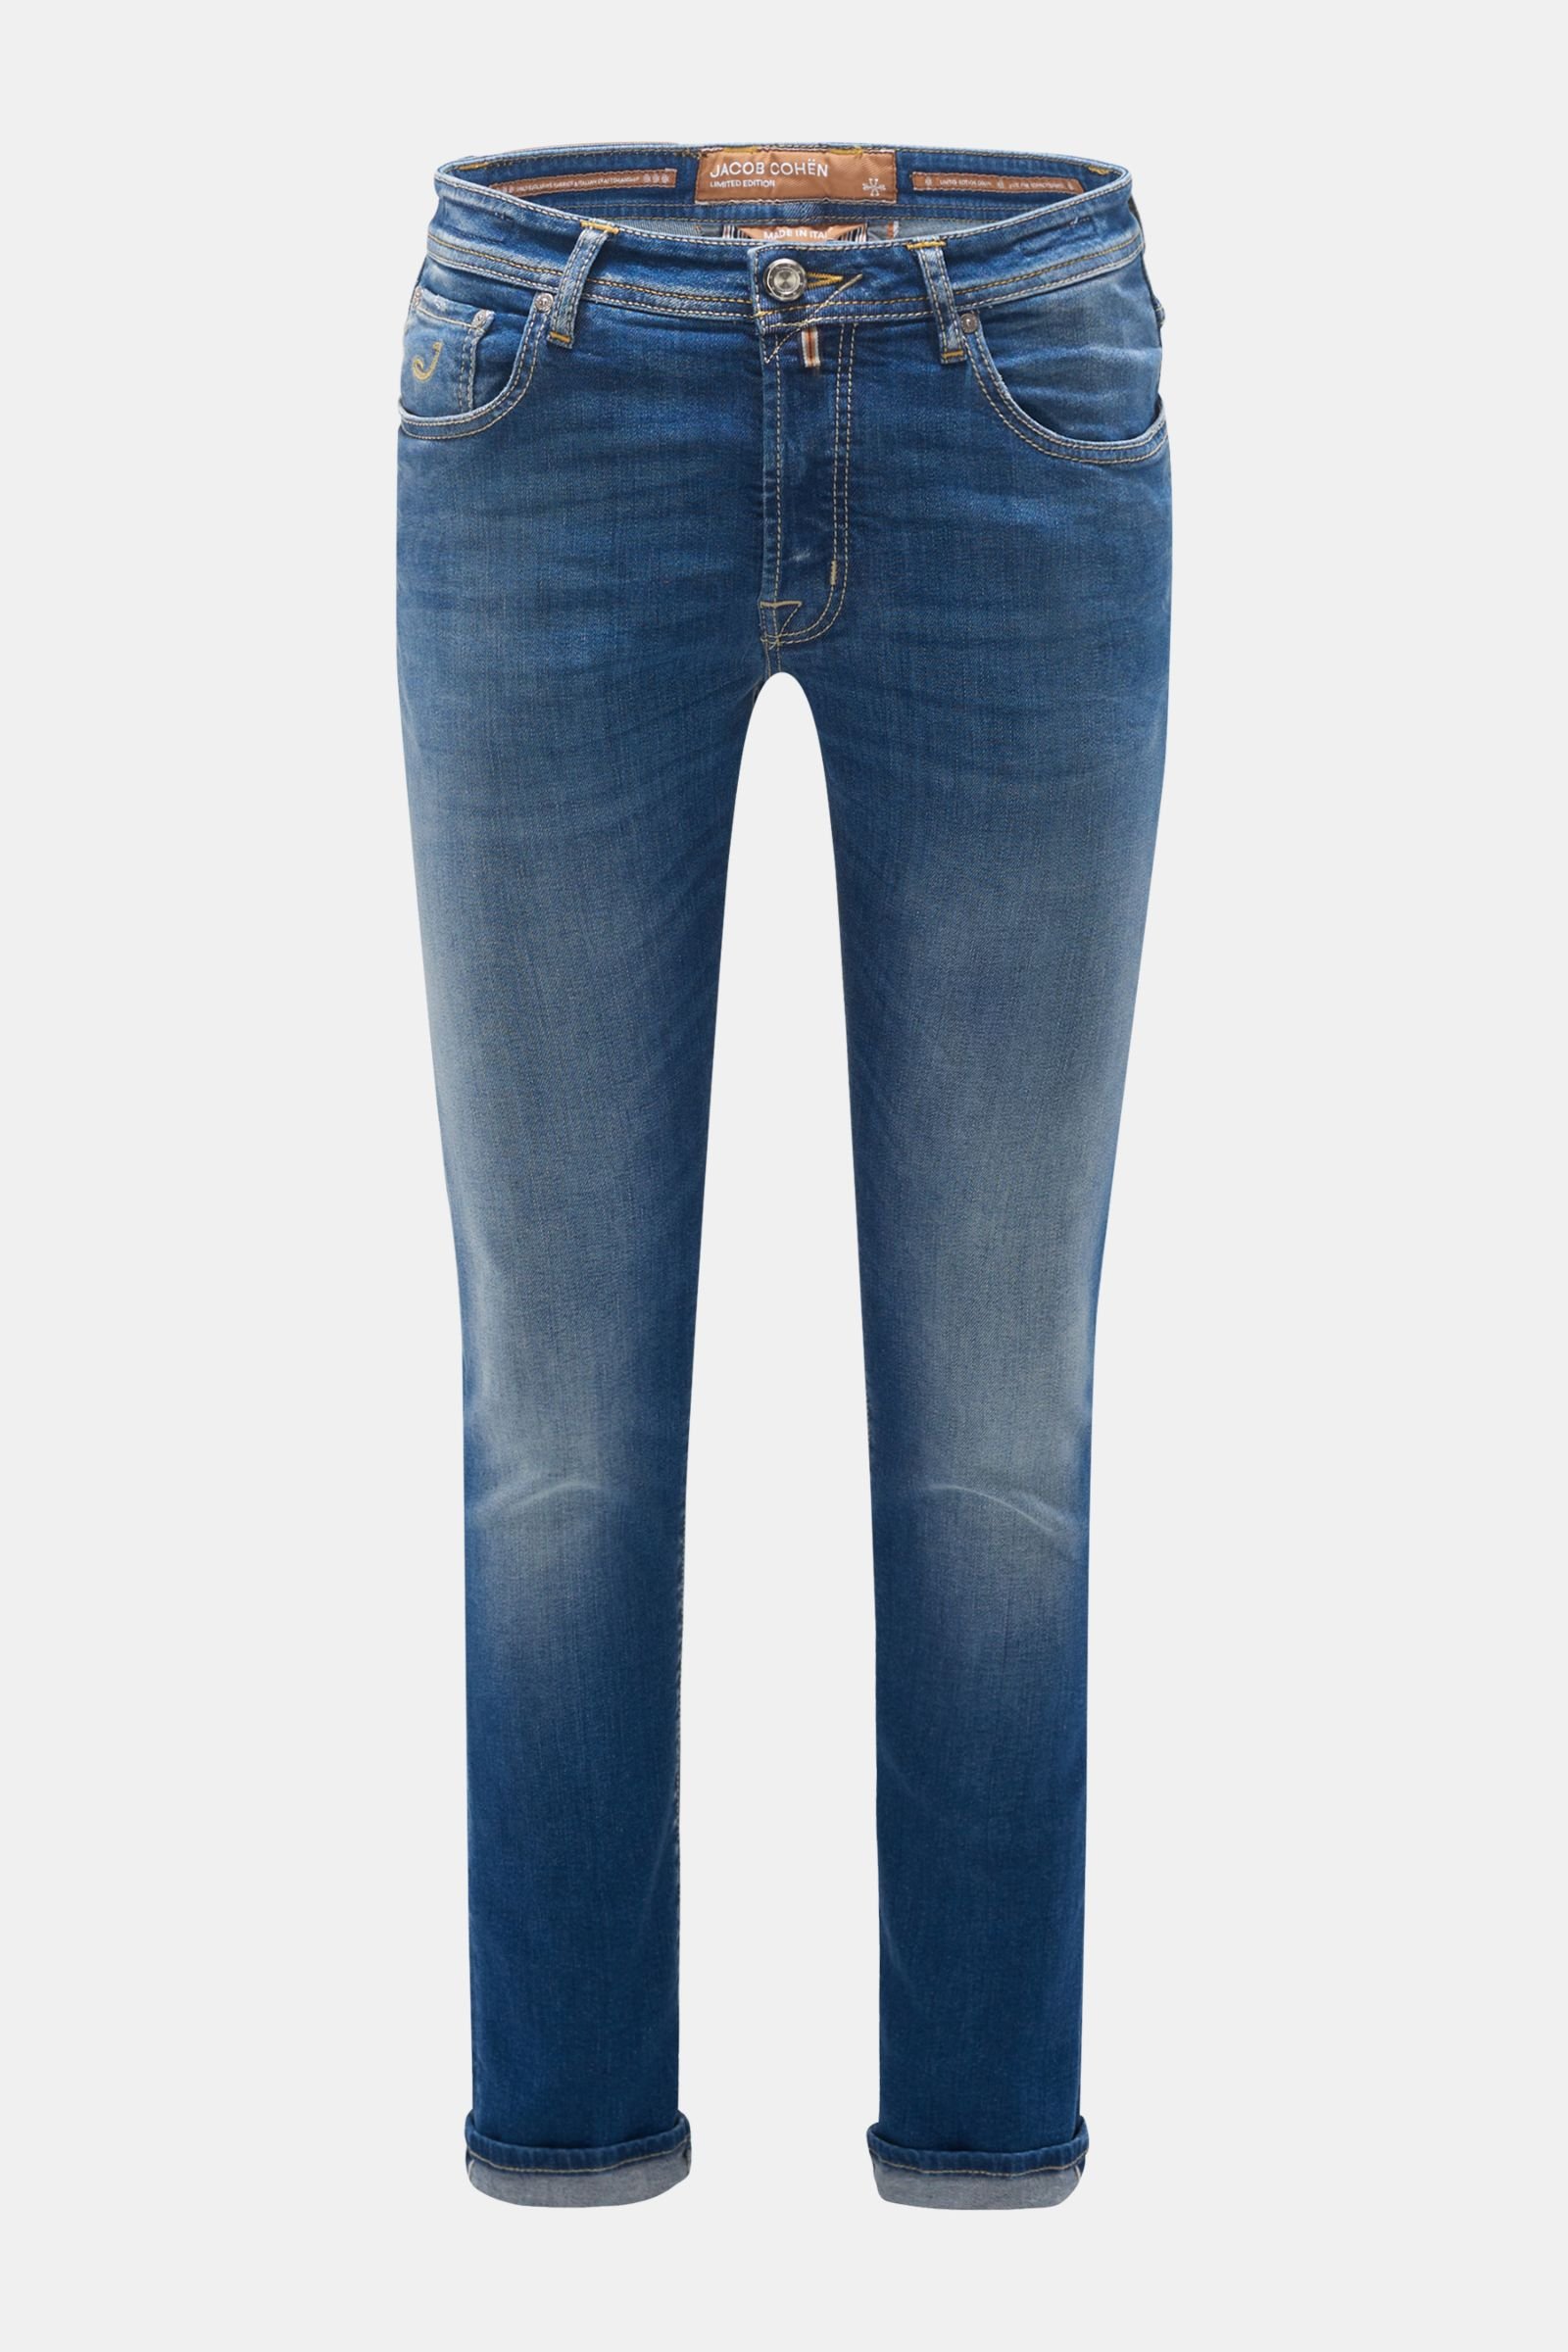 Jeans 'Bard Limited Edition' dark blue (formerly J688)